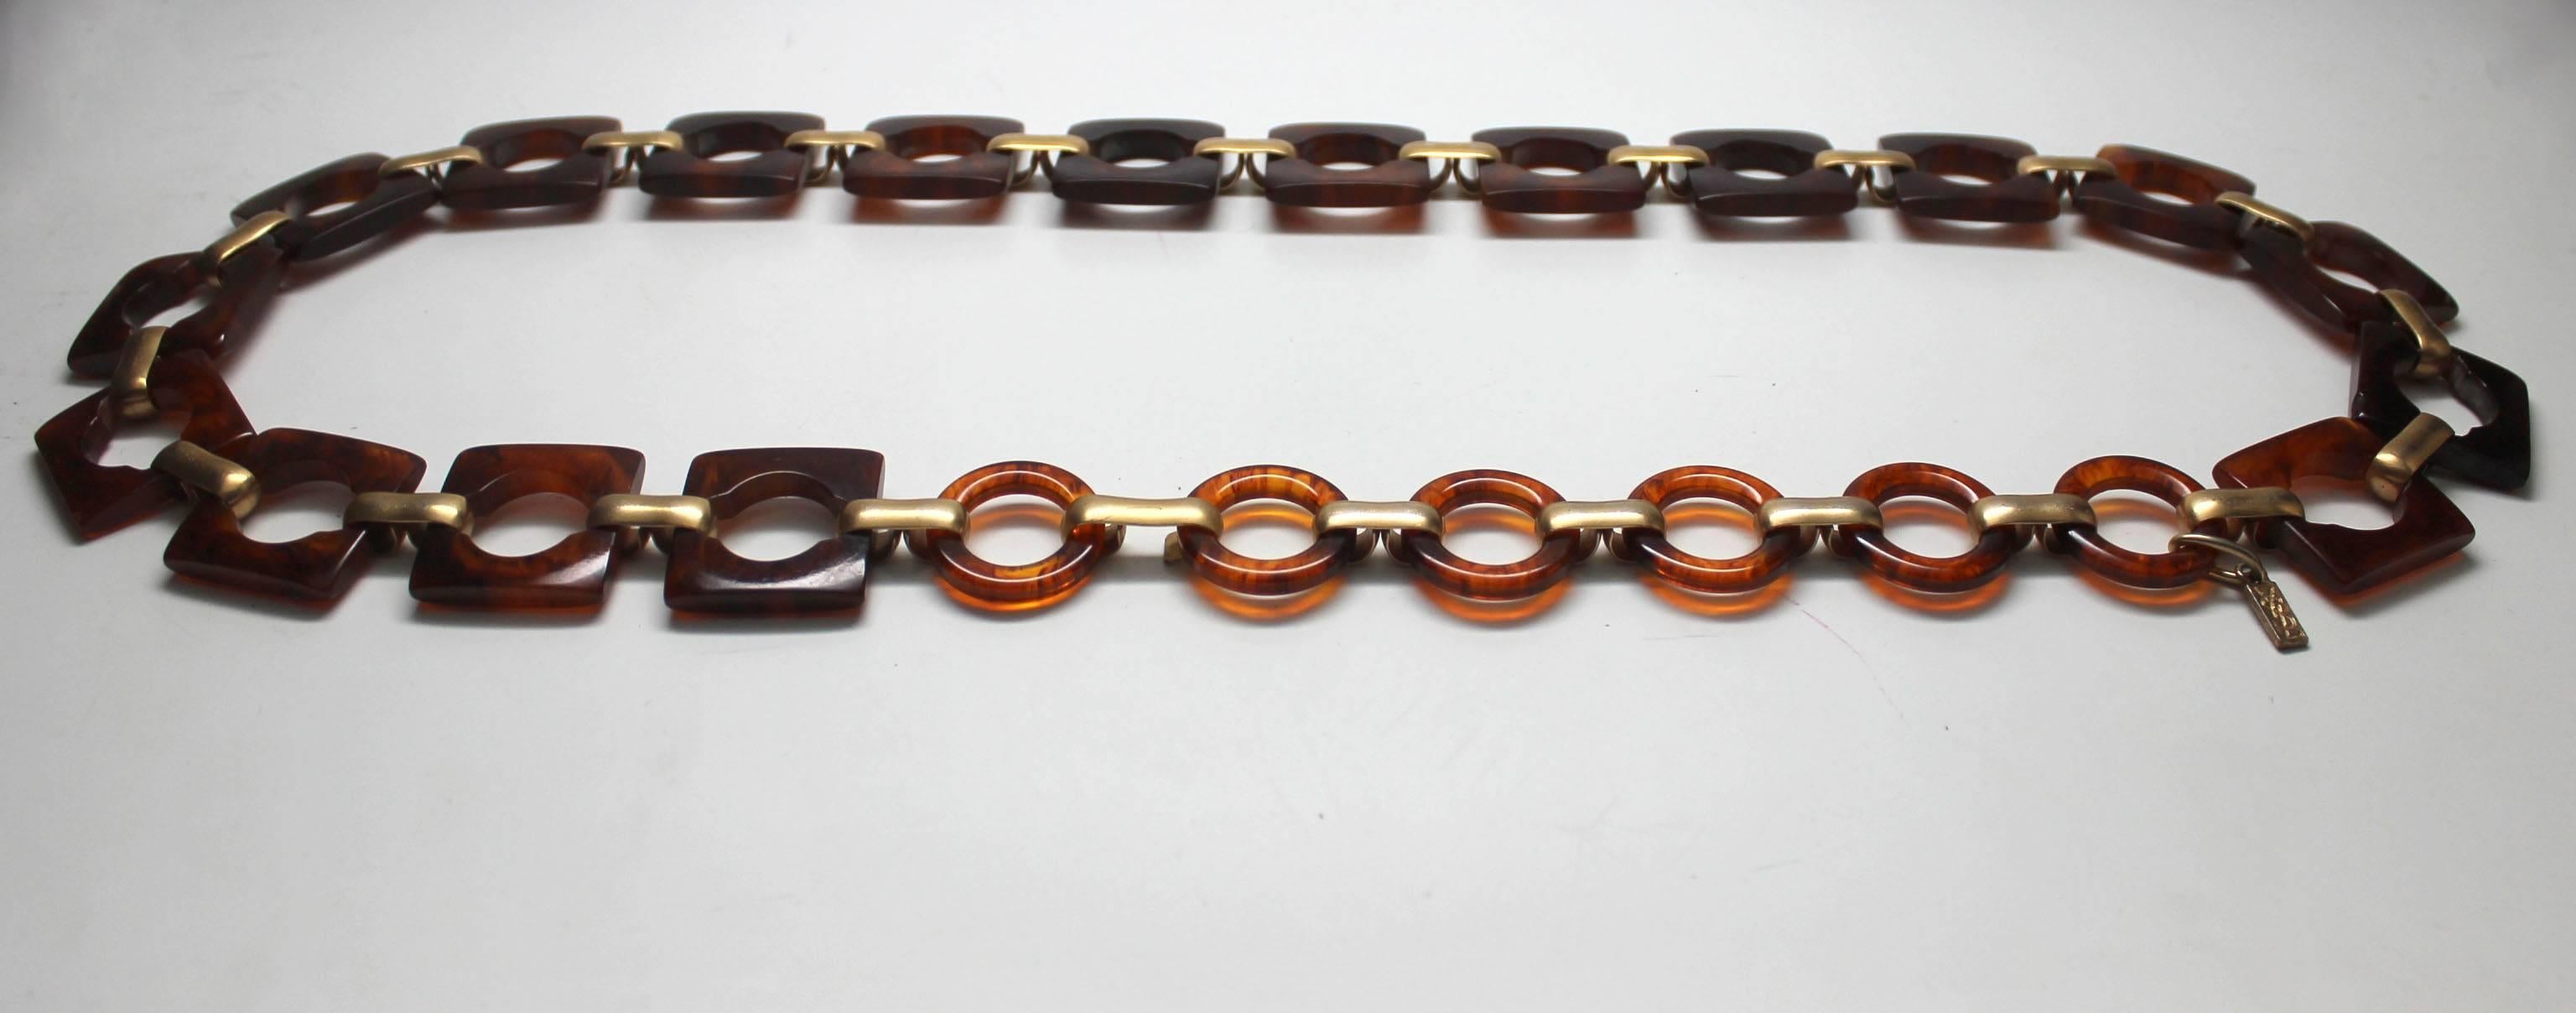 Yves Saint Laurent 1970s Tortoise/Acrylic Geometric Chain Belt In Excellent Condition For Sale In New York, NY